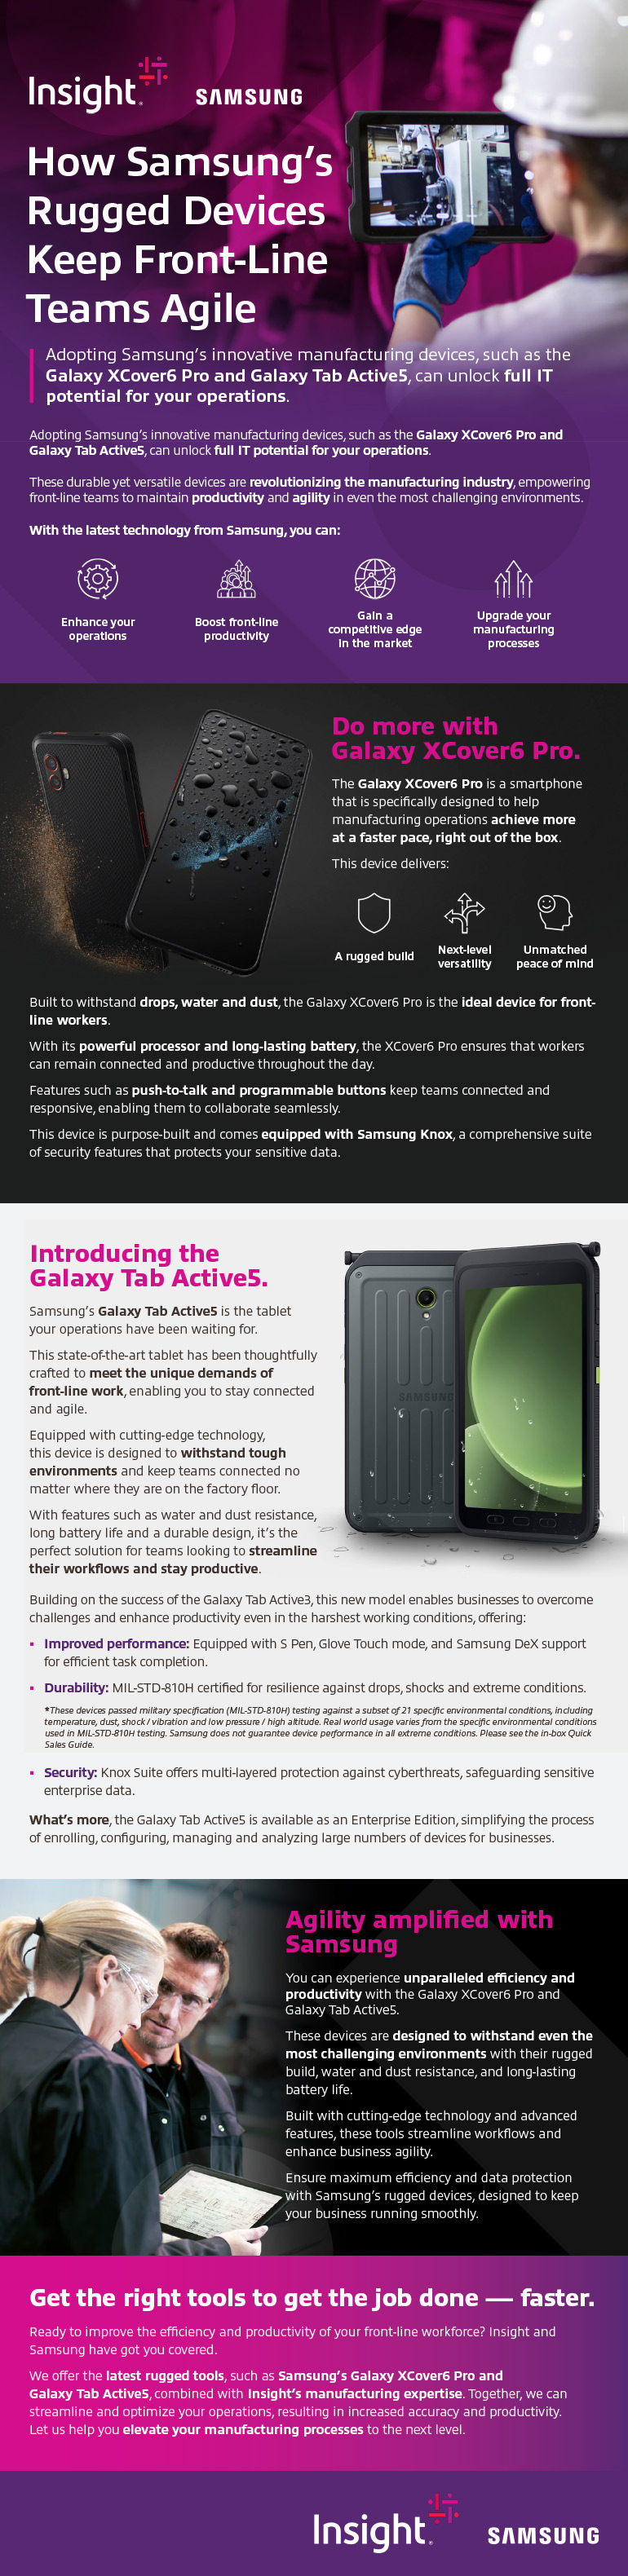 How Samsung’s Rugged Products Keep Front-Line Teams Agile infographic